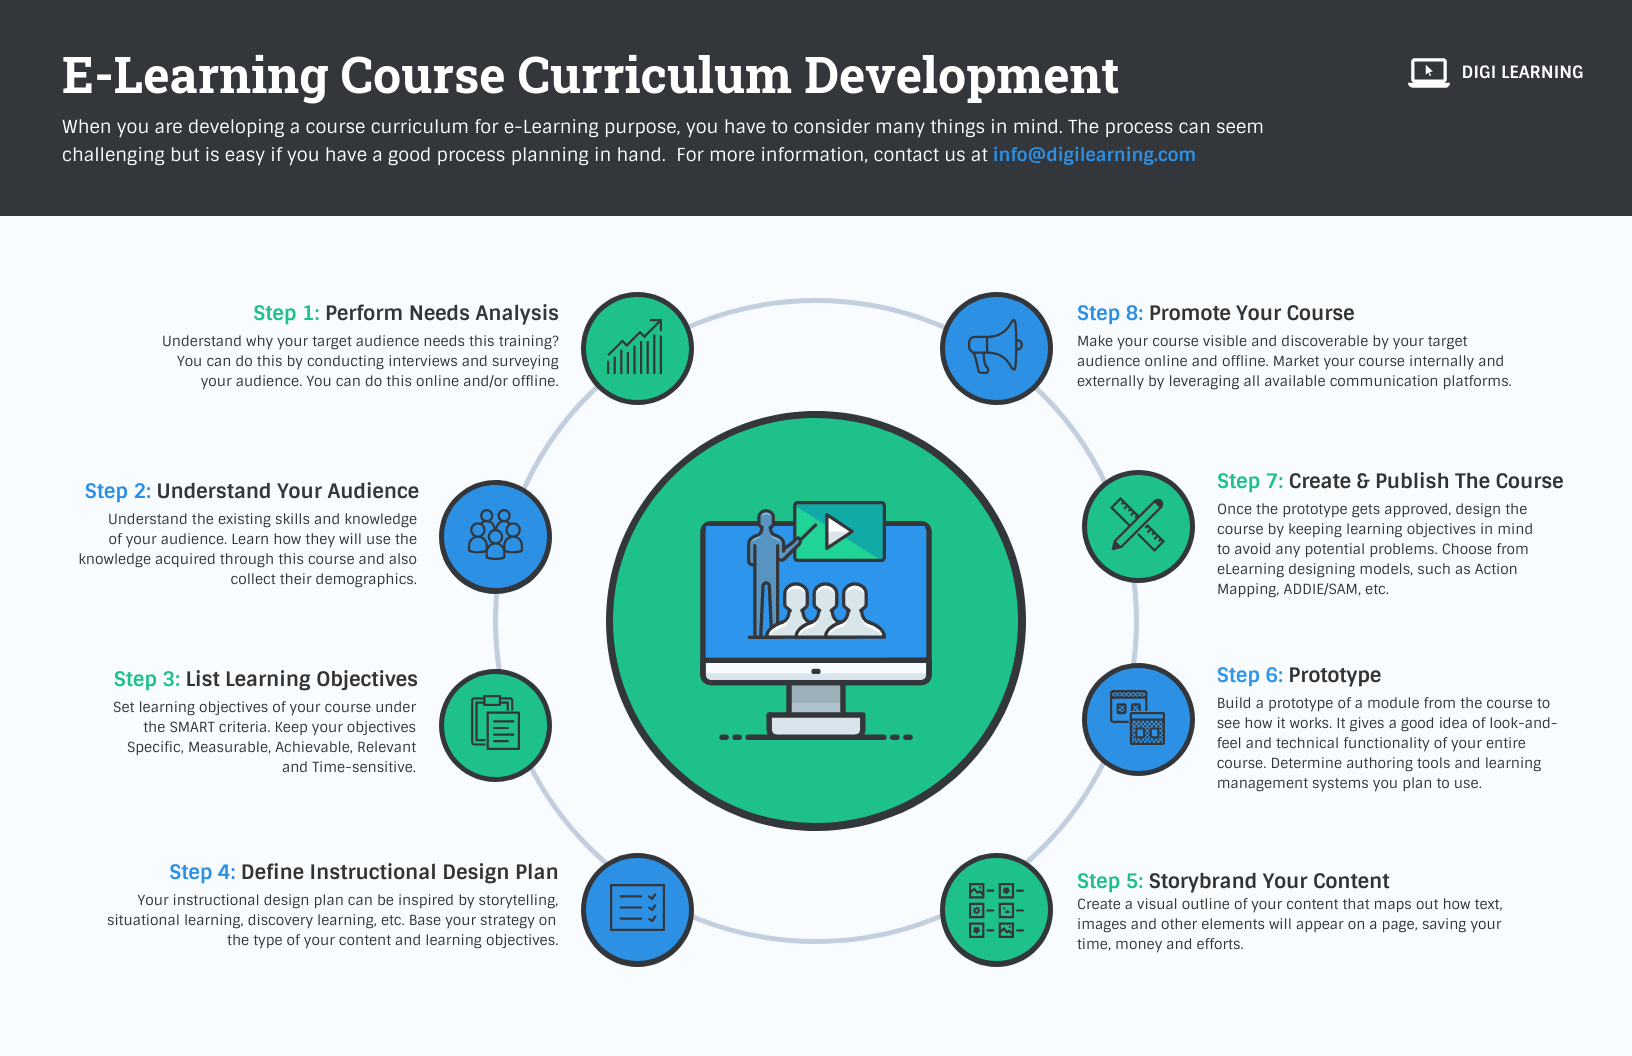 https://trainingmag.com/wp/wp-content/uploads/2021/06/E-learning-Course-Curriculum-Development-Process-Infographic_Venngage.png